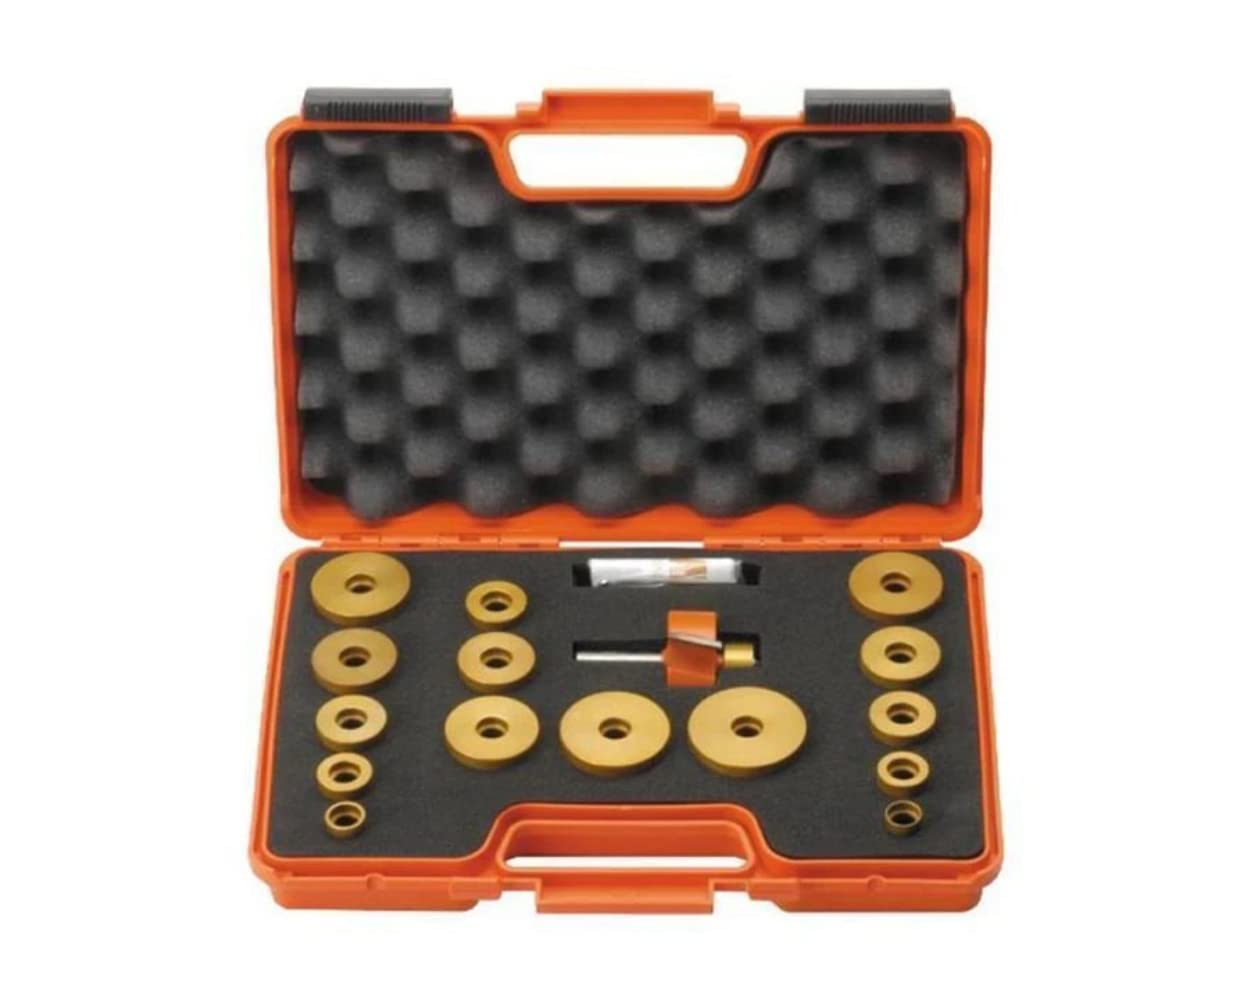 CMT 835.503.11 CMT Grand Rabbet Set in Carrying Case, 1/2-Inch Shank, Carbide-Tipped - $74.95 @ Amazon FS with Prime